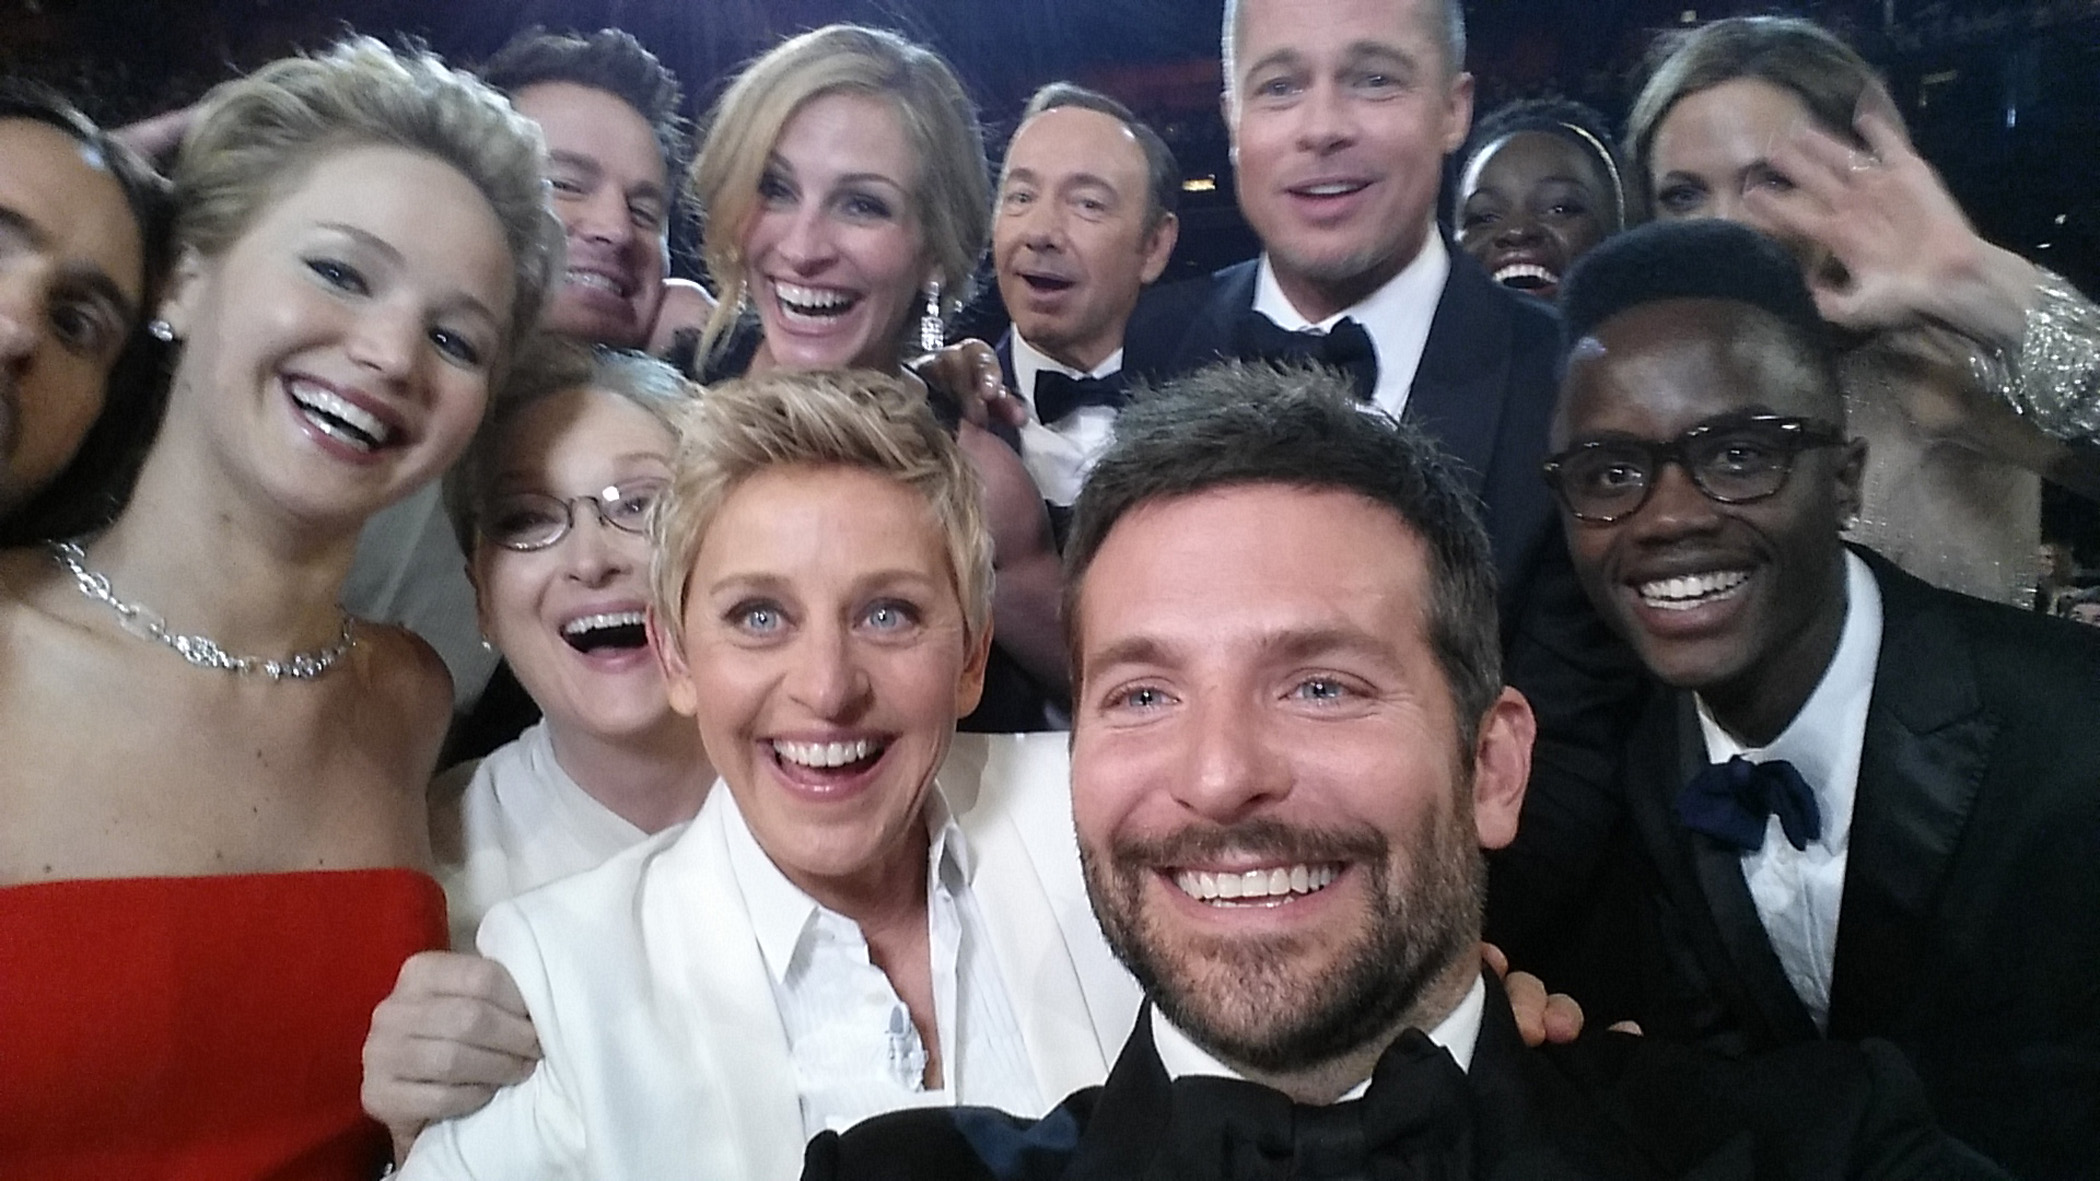 The iconic Oscars selfie from the 2014 ceremony features Ellen DeGeneres, Bradley Cooper, Jared Leto, Jennifer Lawrence, Channing Tatum, Meryl Streep, Julia Roberts, Kevin Spacey, Brad Pitt, Lupita Nyong'o, Angelina Jolie, Peter Nyong'o Jr. and Bradley Cooper.